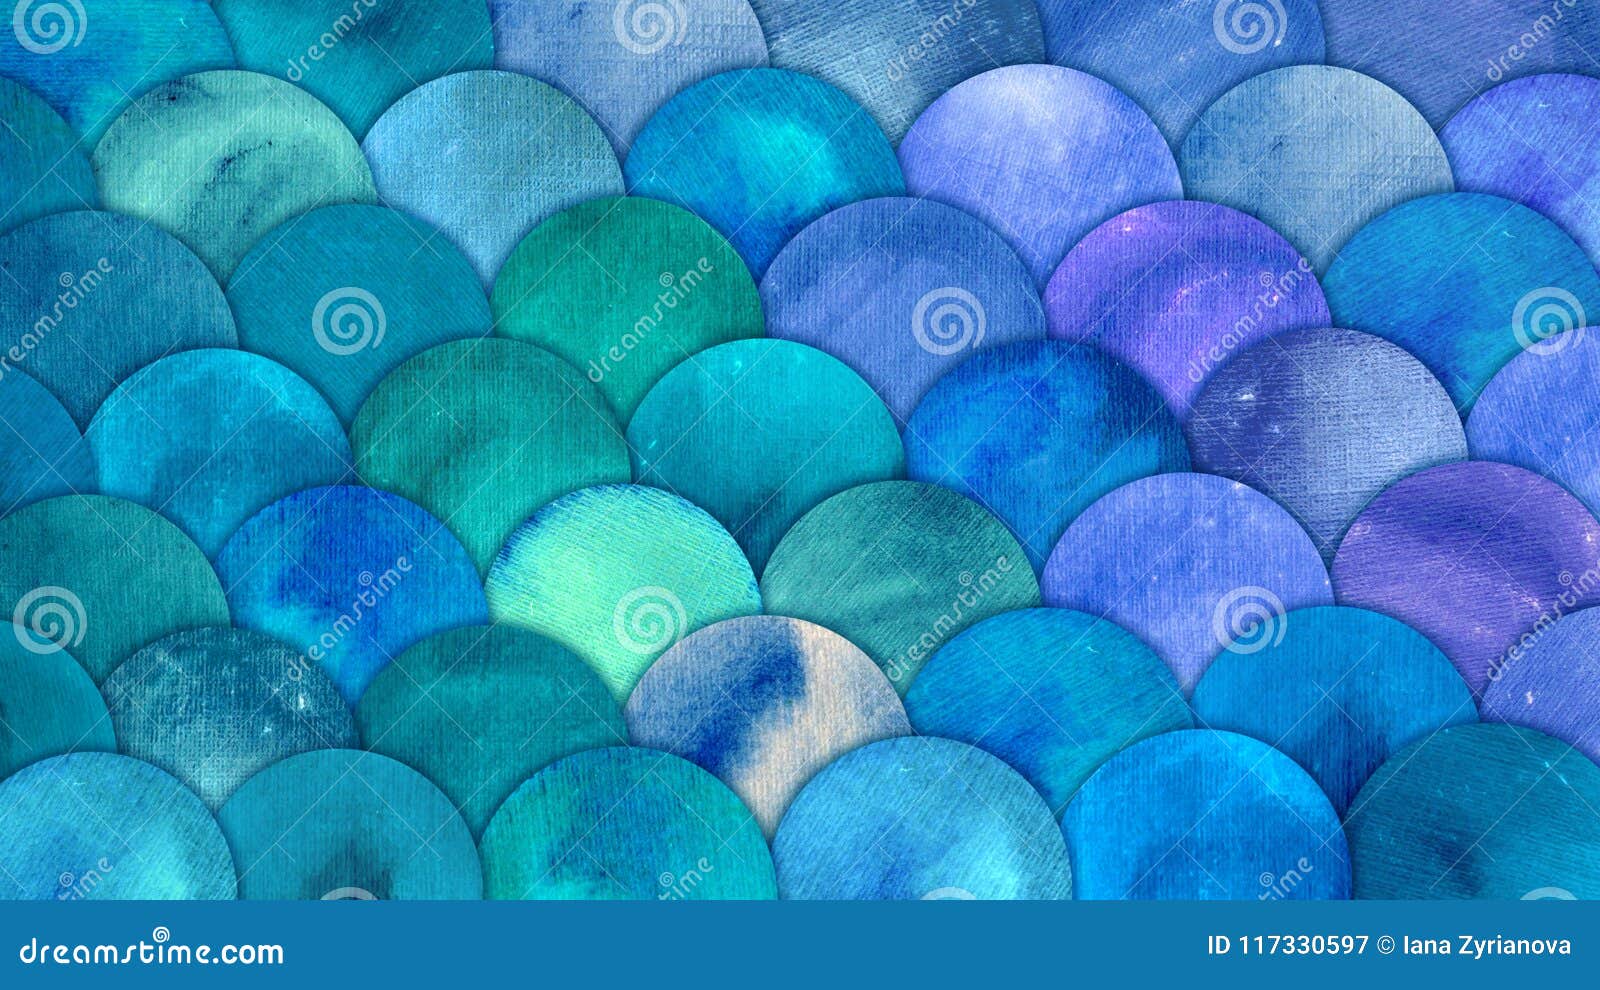 mermaid scales watercolor fish squame background. bright summer blue sea pattern with reptilian scales abstract